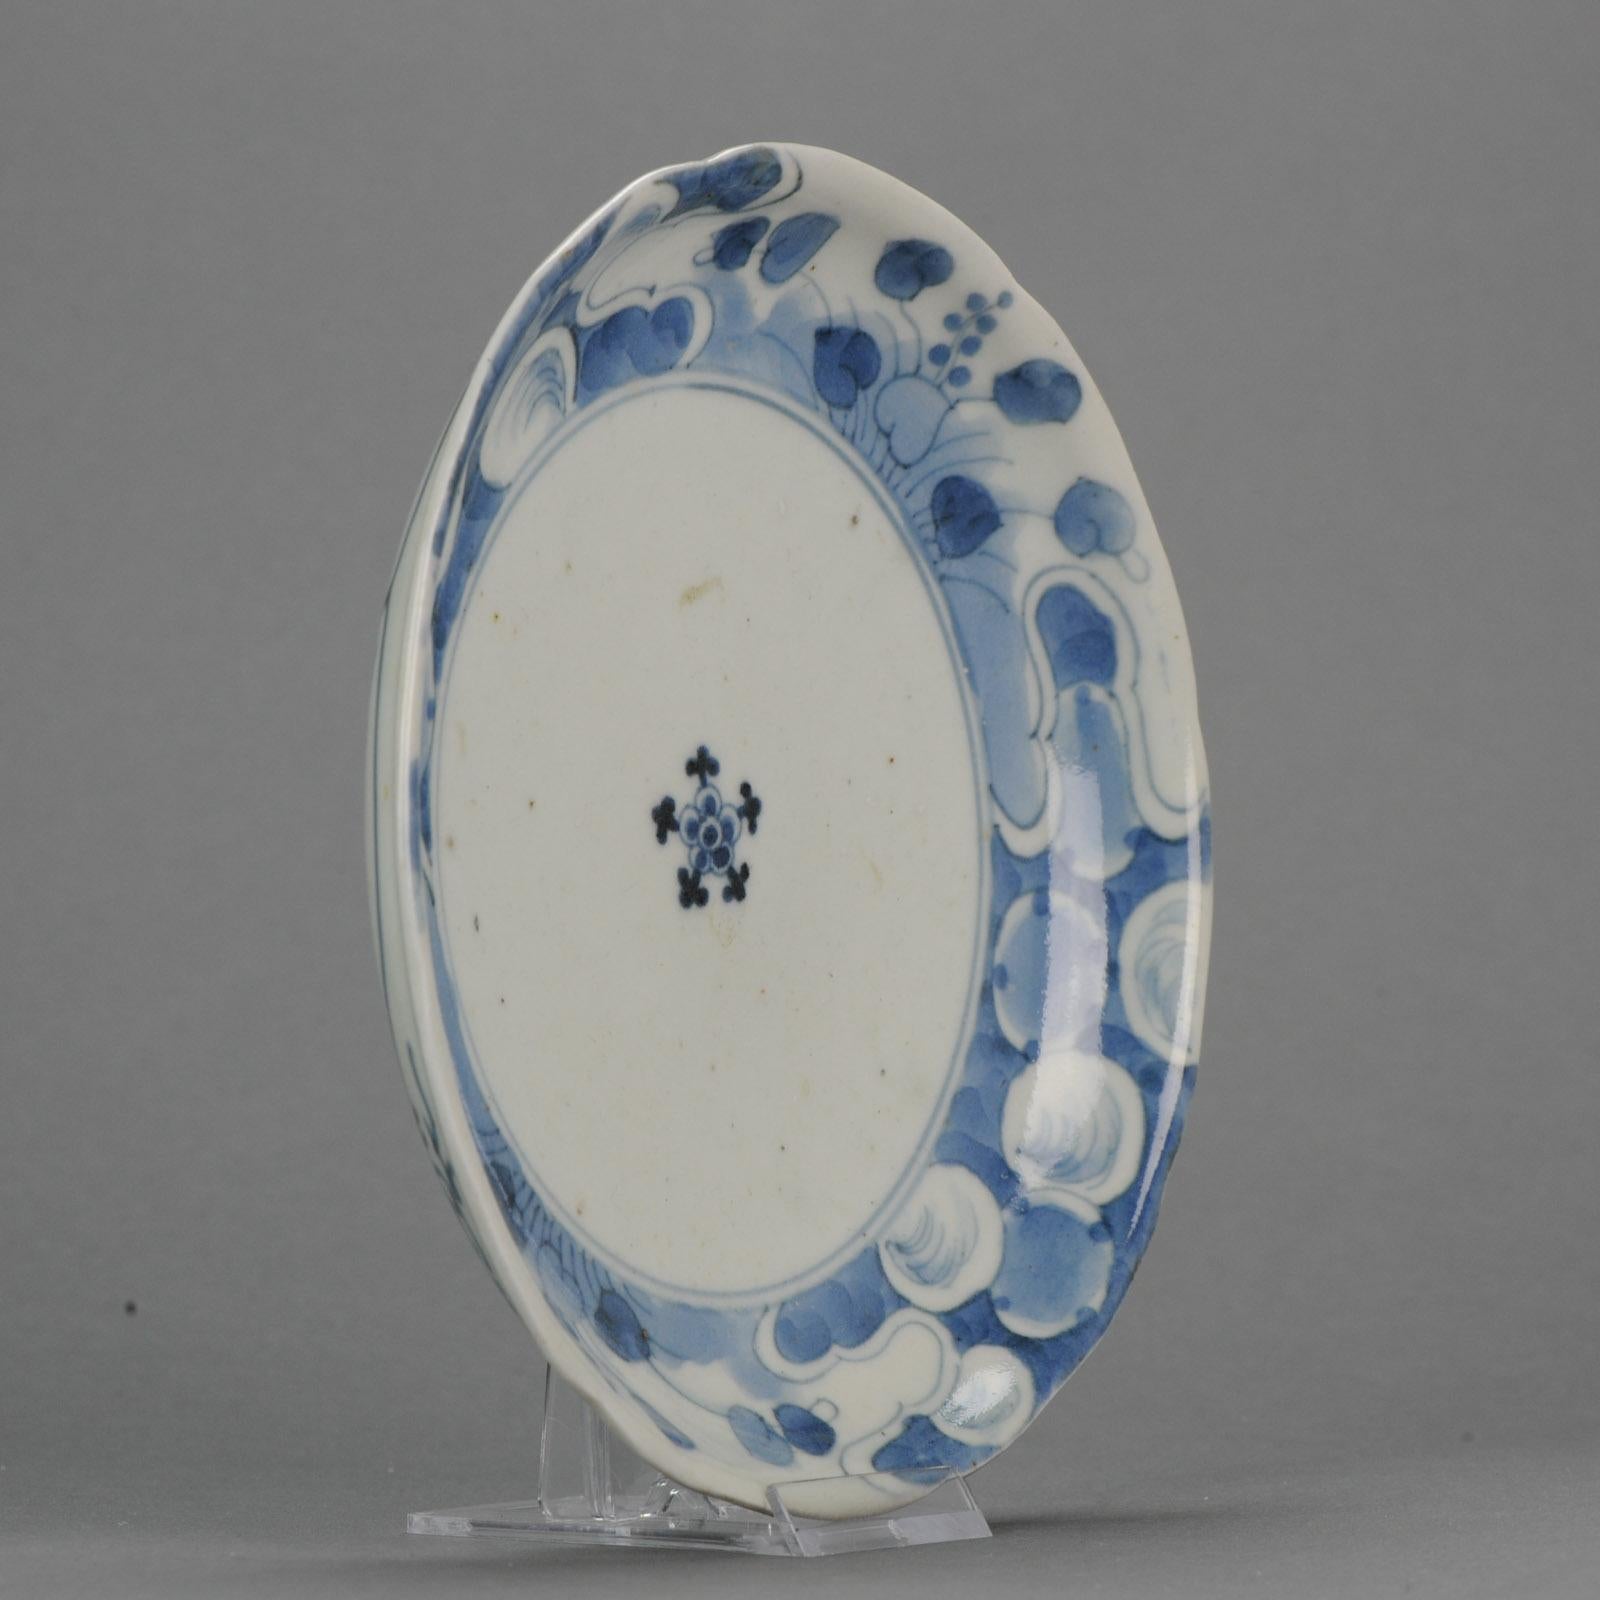 Lovely & High Quality Japanese Porcelain dish with a flower scene.

Additional information:
Material: Porcelain & Pottery
Type: Plates
Color: Blue & White
Region of Origin: Japan
Country of Manufacturing: Japan
Period: 17th century, 18th century Edo